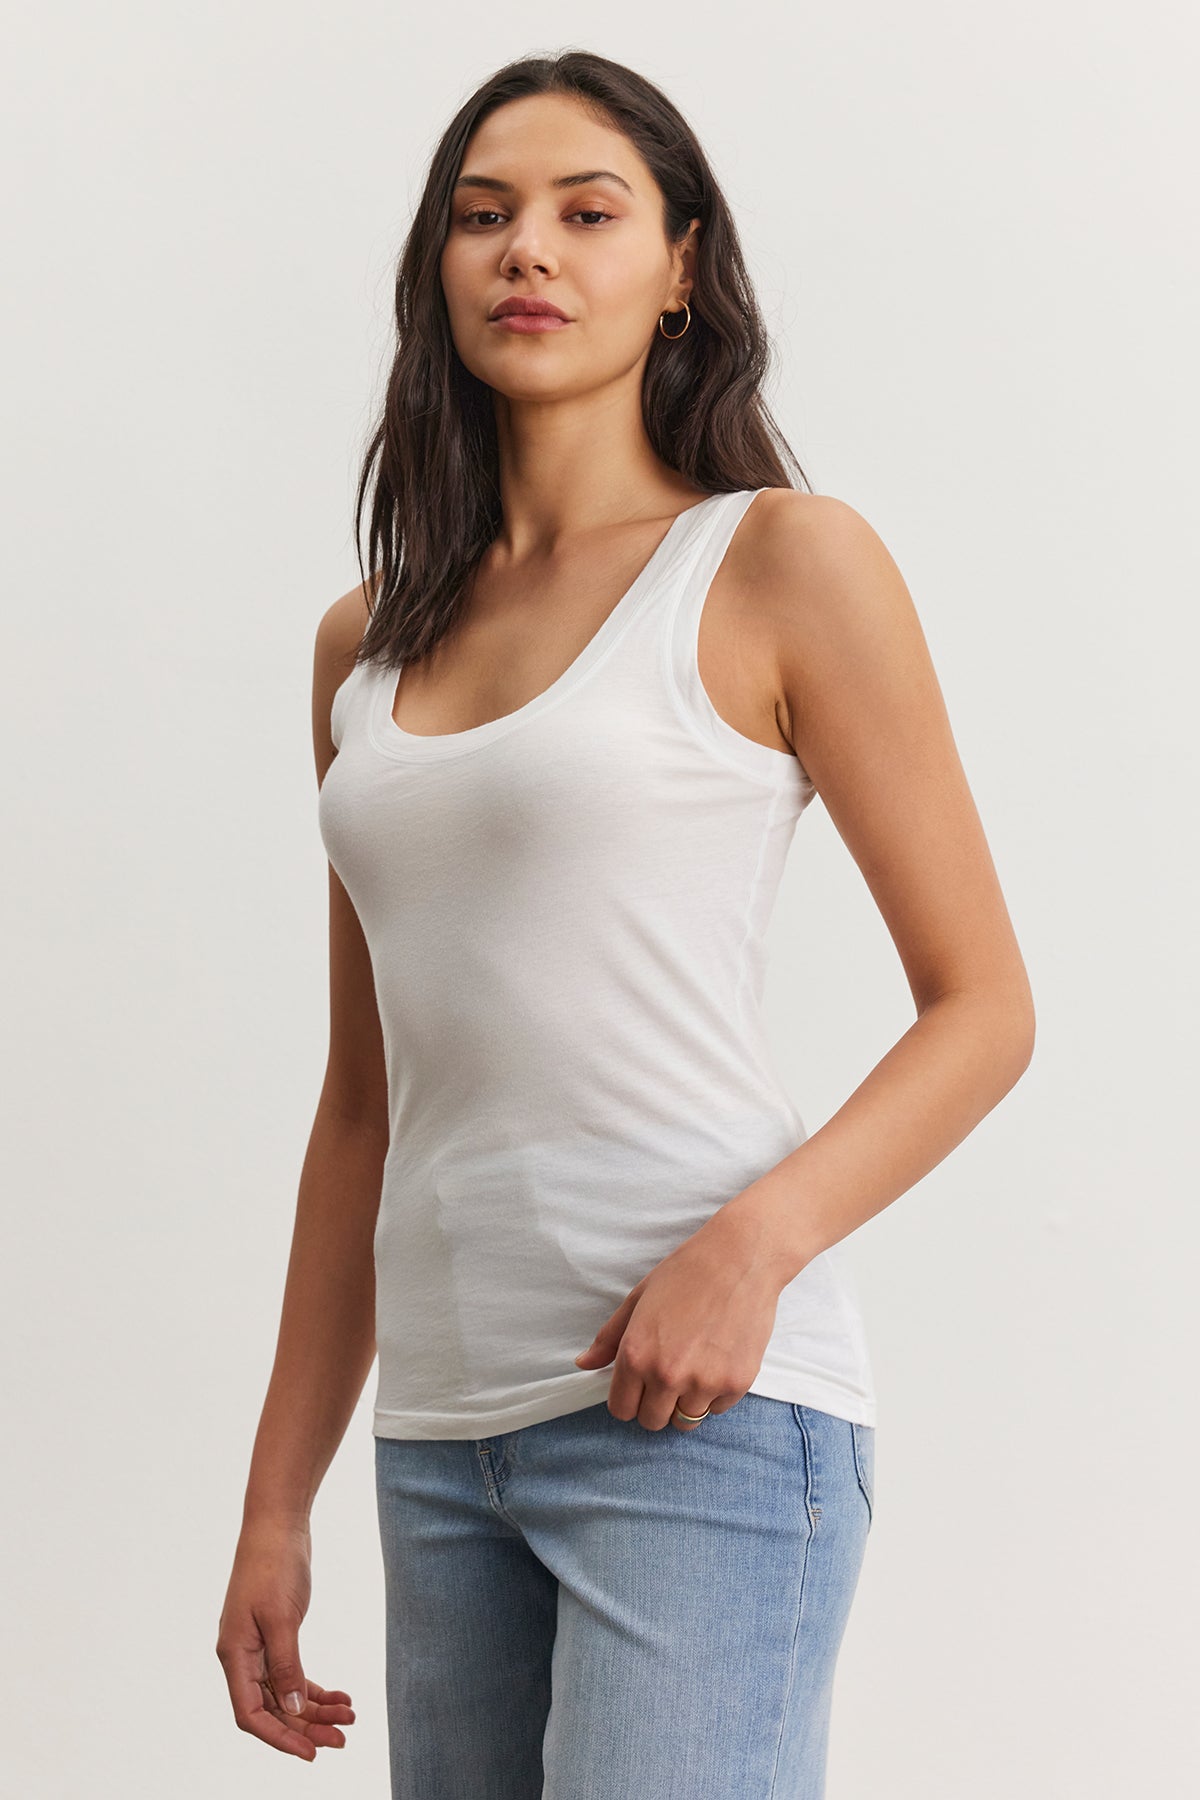   A person with long dark hair is wearing a white, fitted MOSSY TANK TOP by Velvet by Graham & Spencer and light blue jeans, standing with a neutral expression against a plain background. This ensemble highlights the versatility of a well-curated wardrobe. 